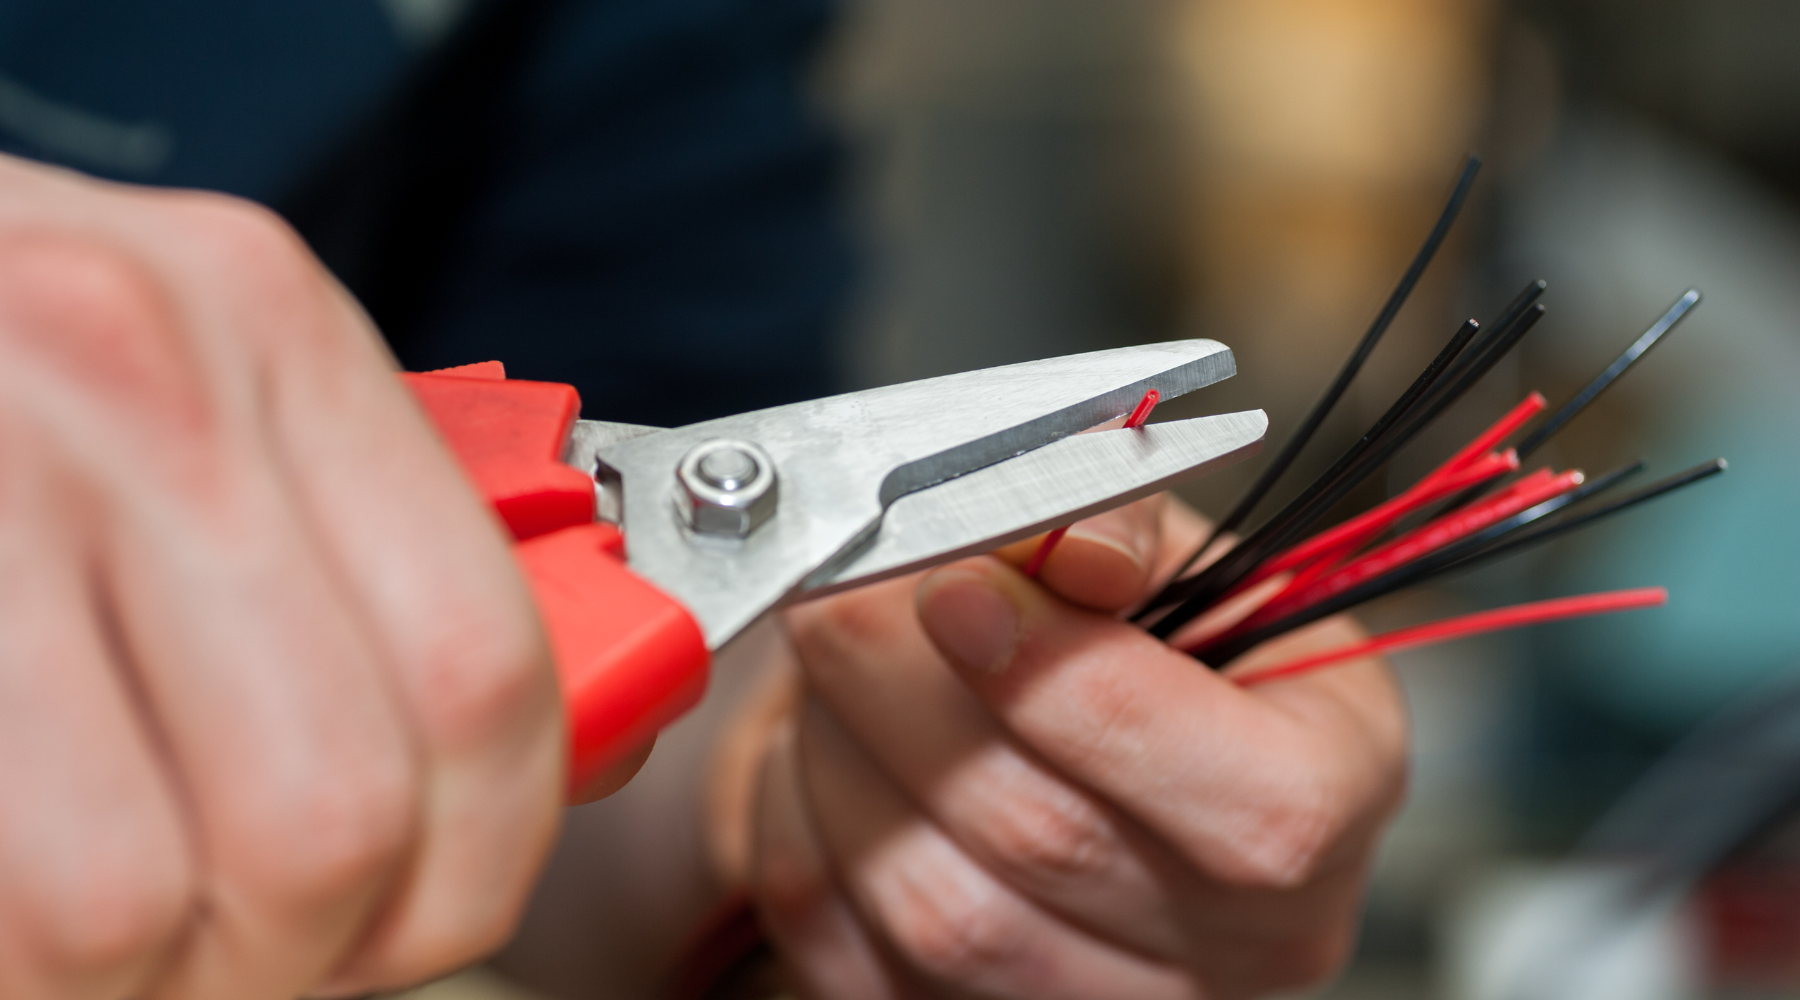 A Guide on How to Cut Wire Without Cutters